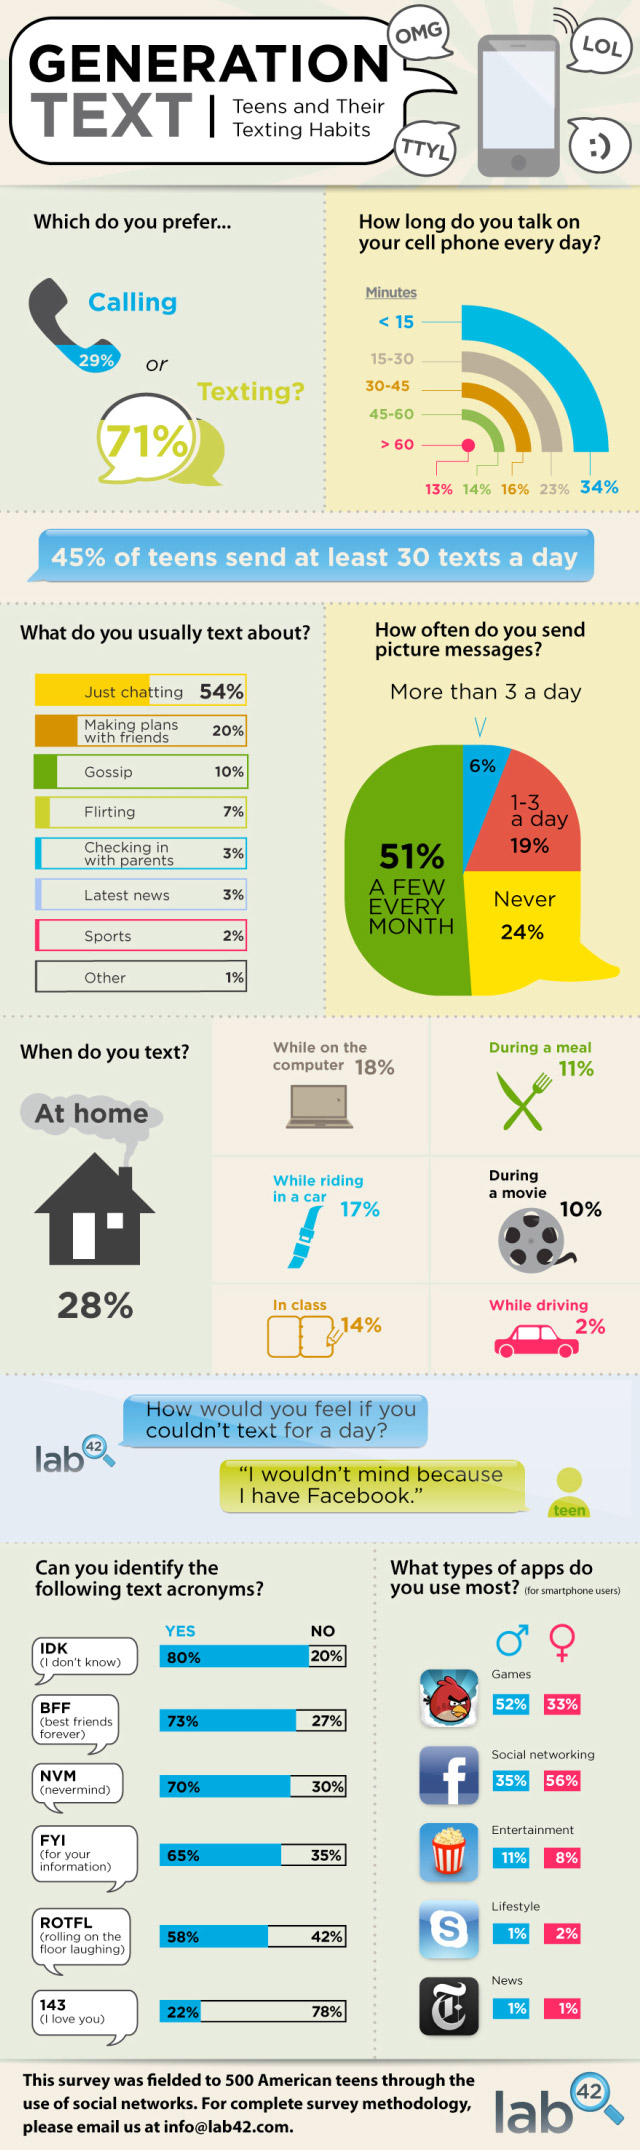 Texting Habits of Users